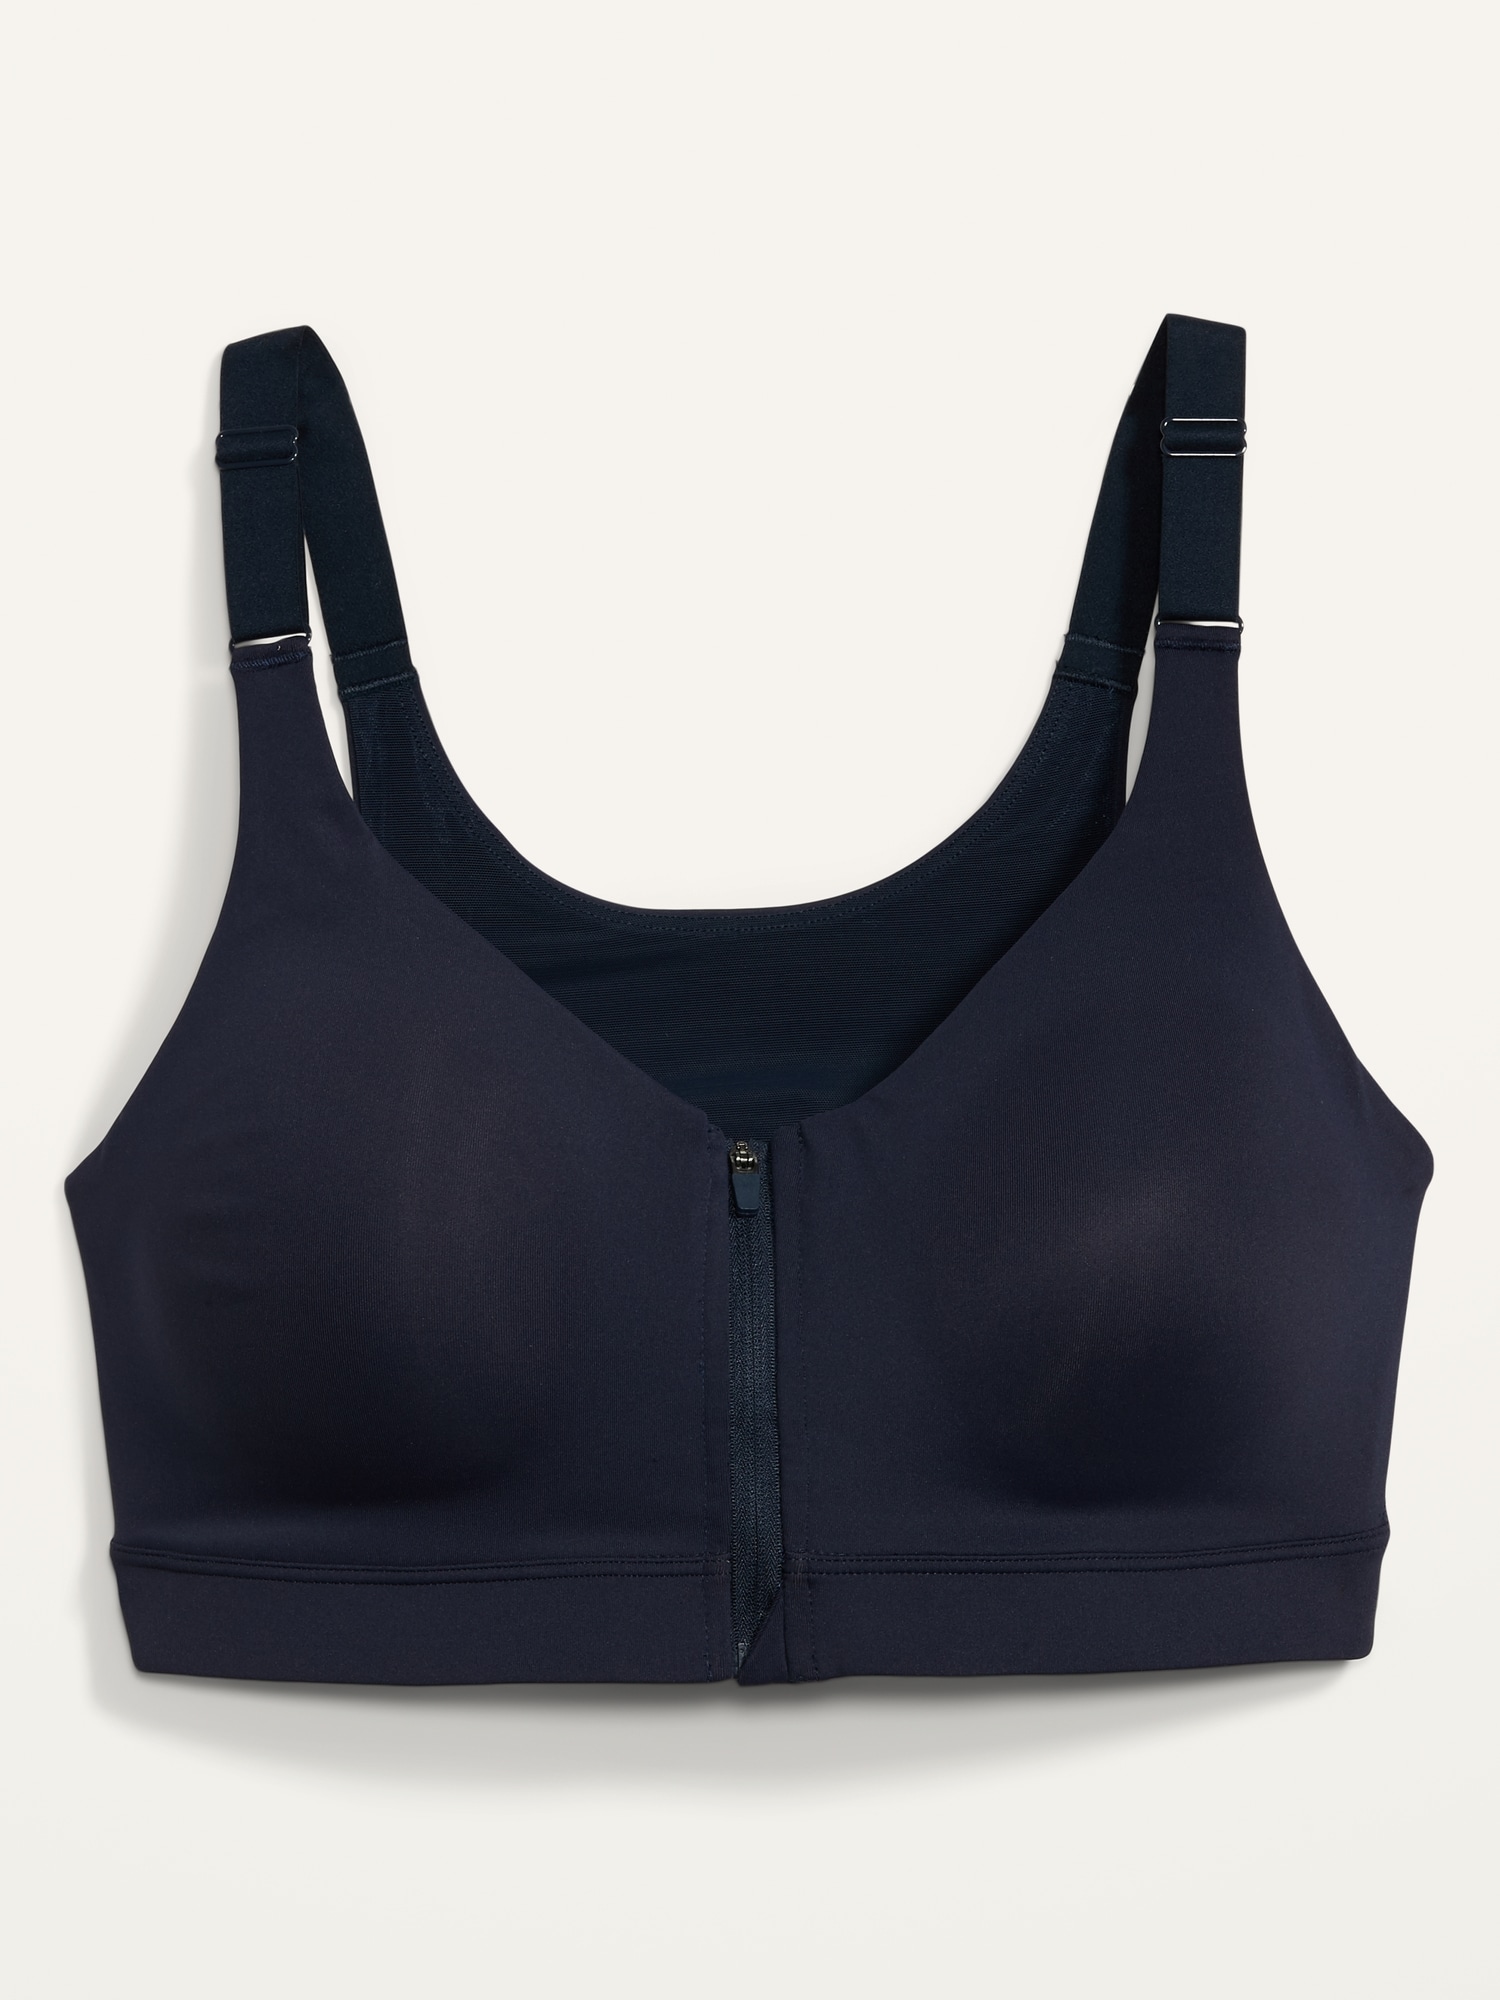 Old Navy, Intimates & Sleepwear, Old Navy Active Zip Front High Support Sports  Bra 34d